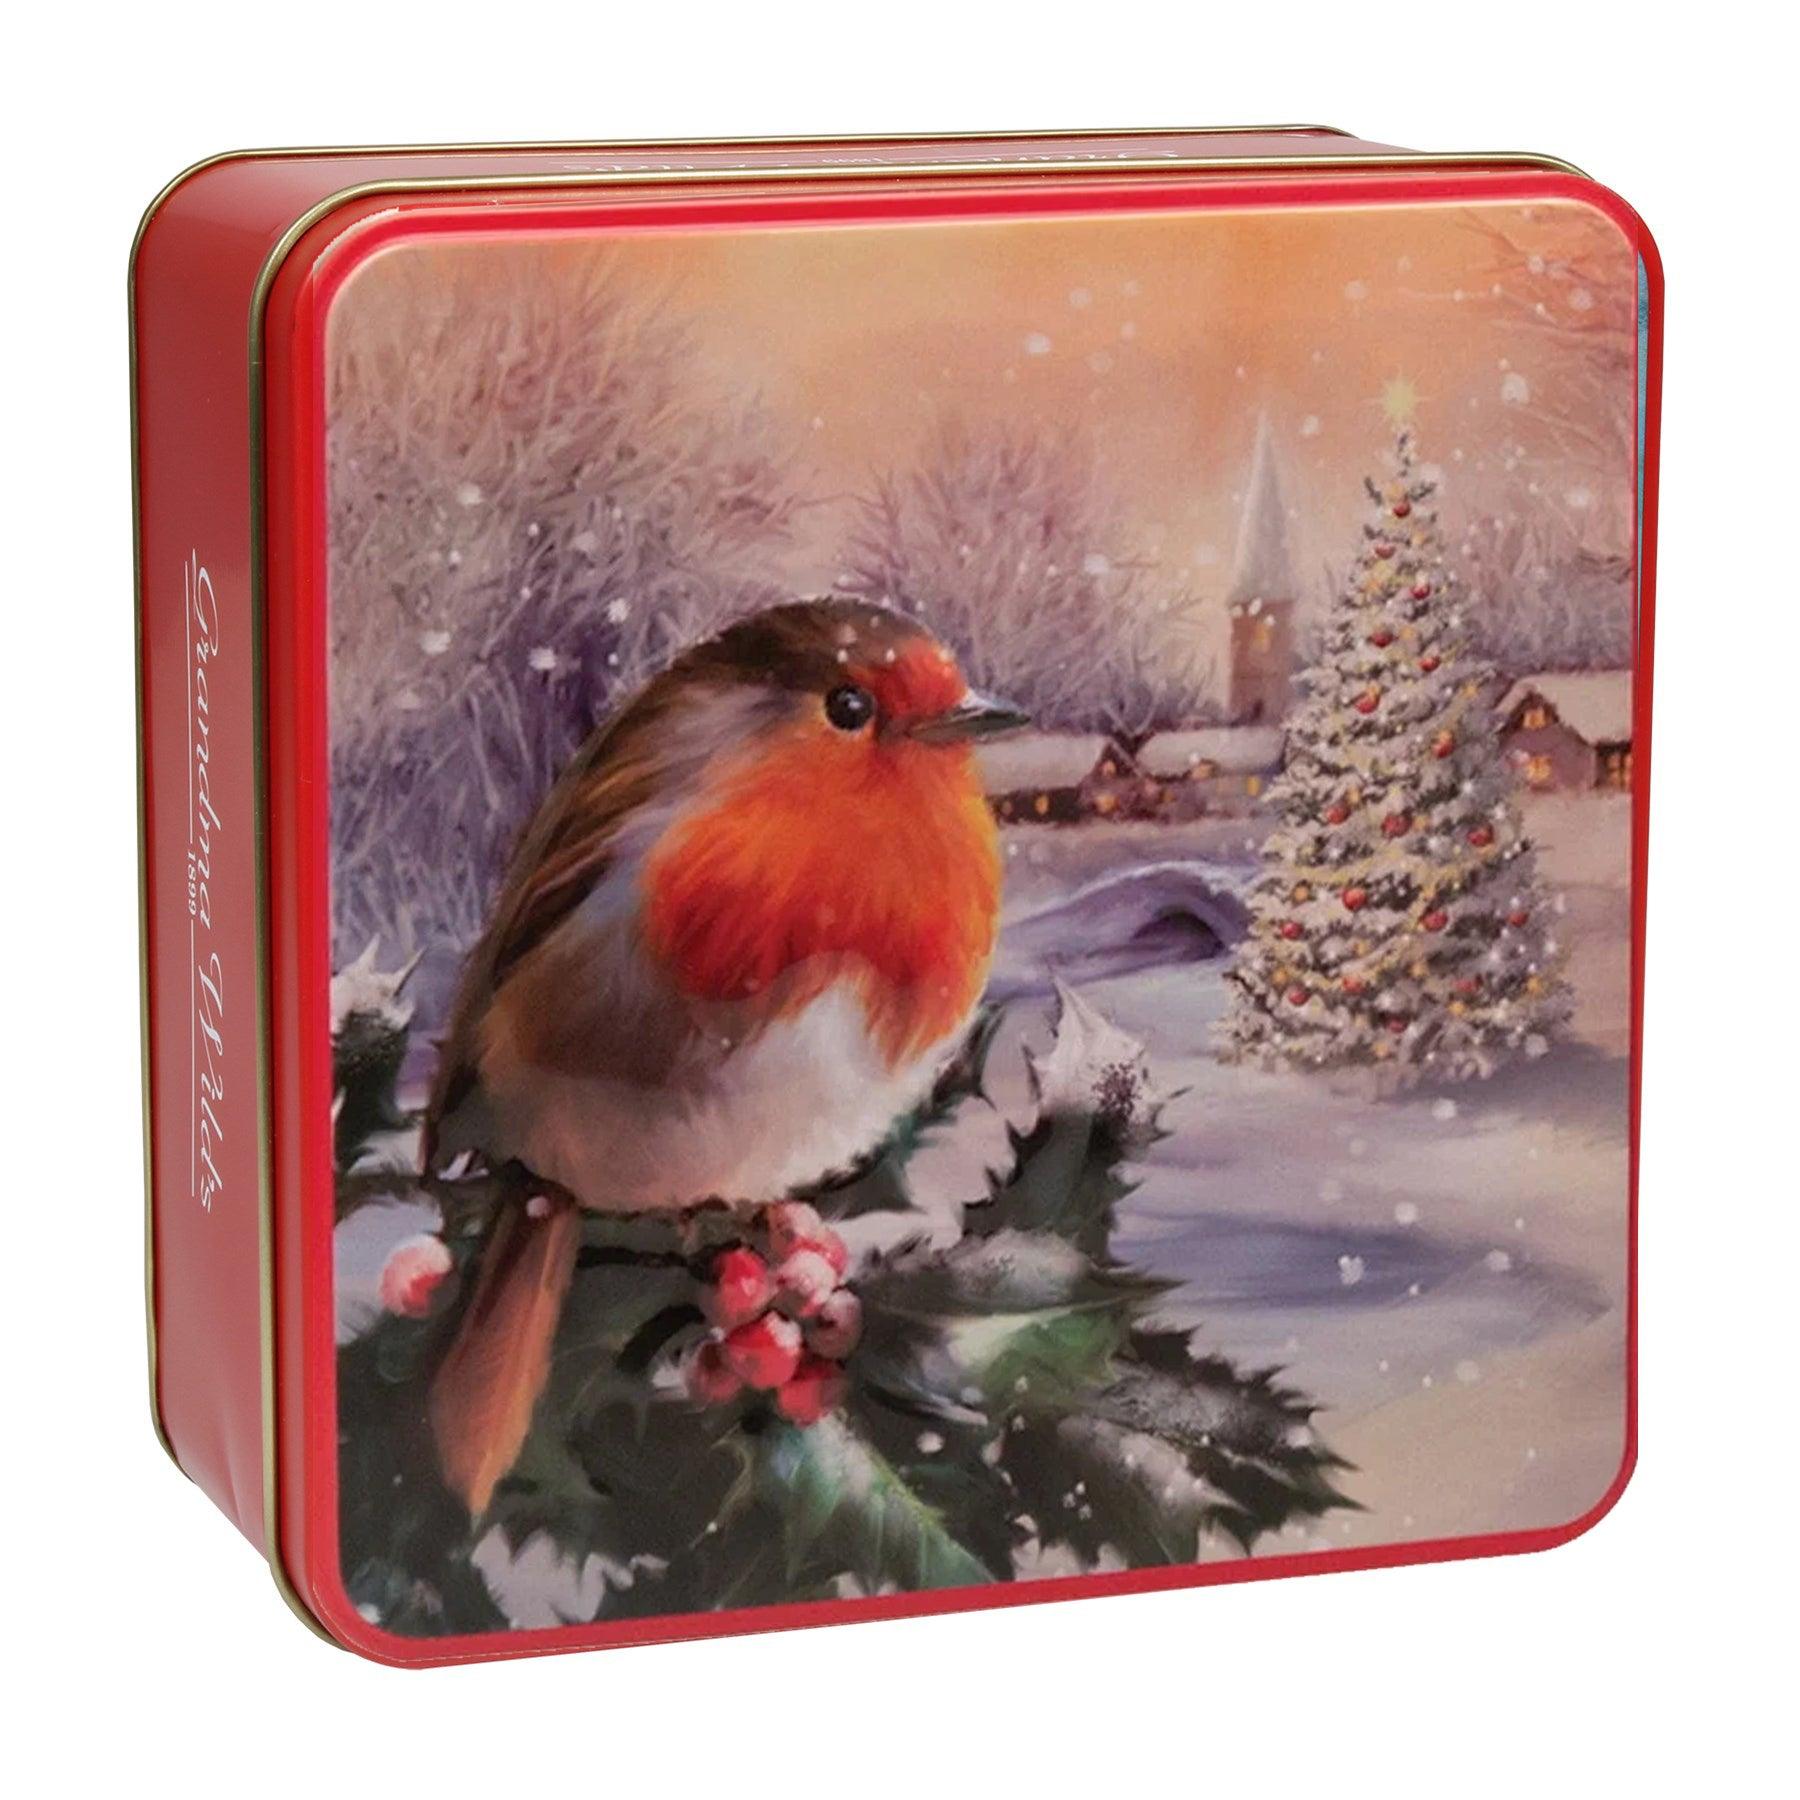 Grandma Wilds - Christmas Biscuit Gift Tin - Robin in a Winter Village Design - Embossed Tin 160g - Vending Superstore